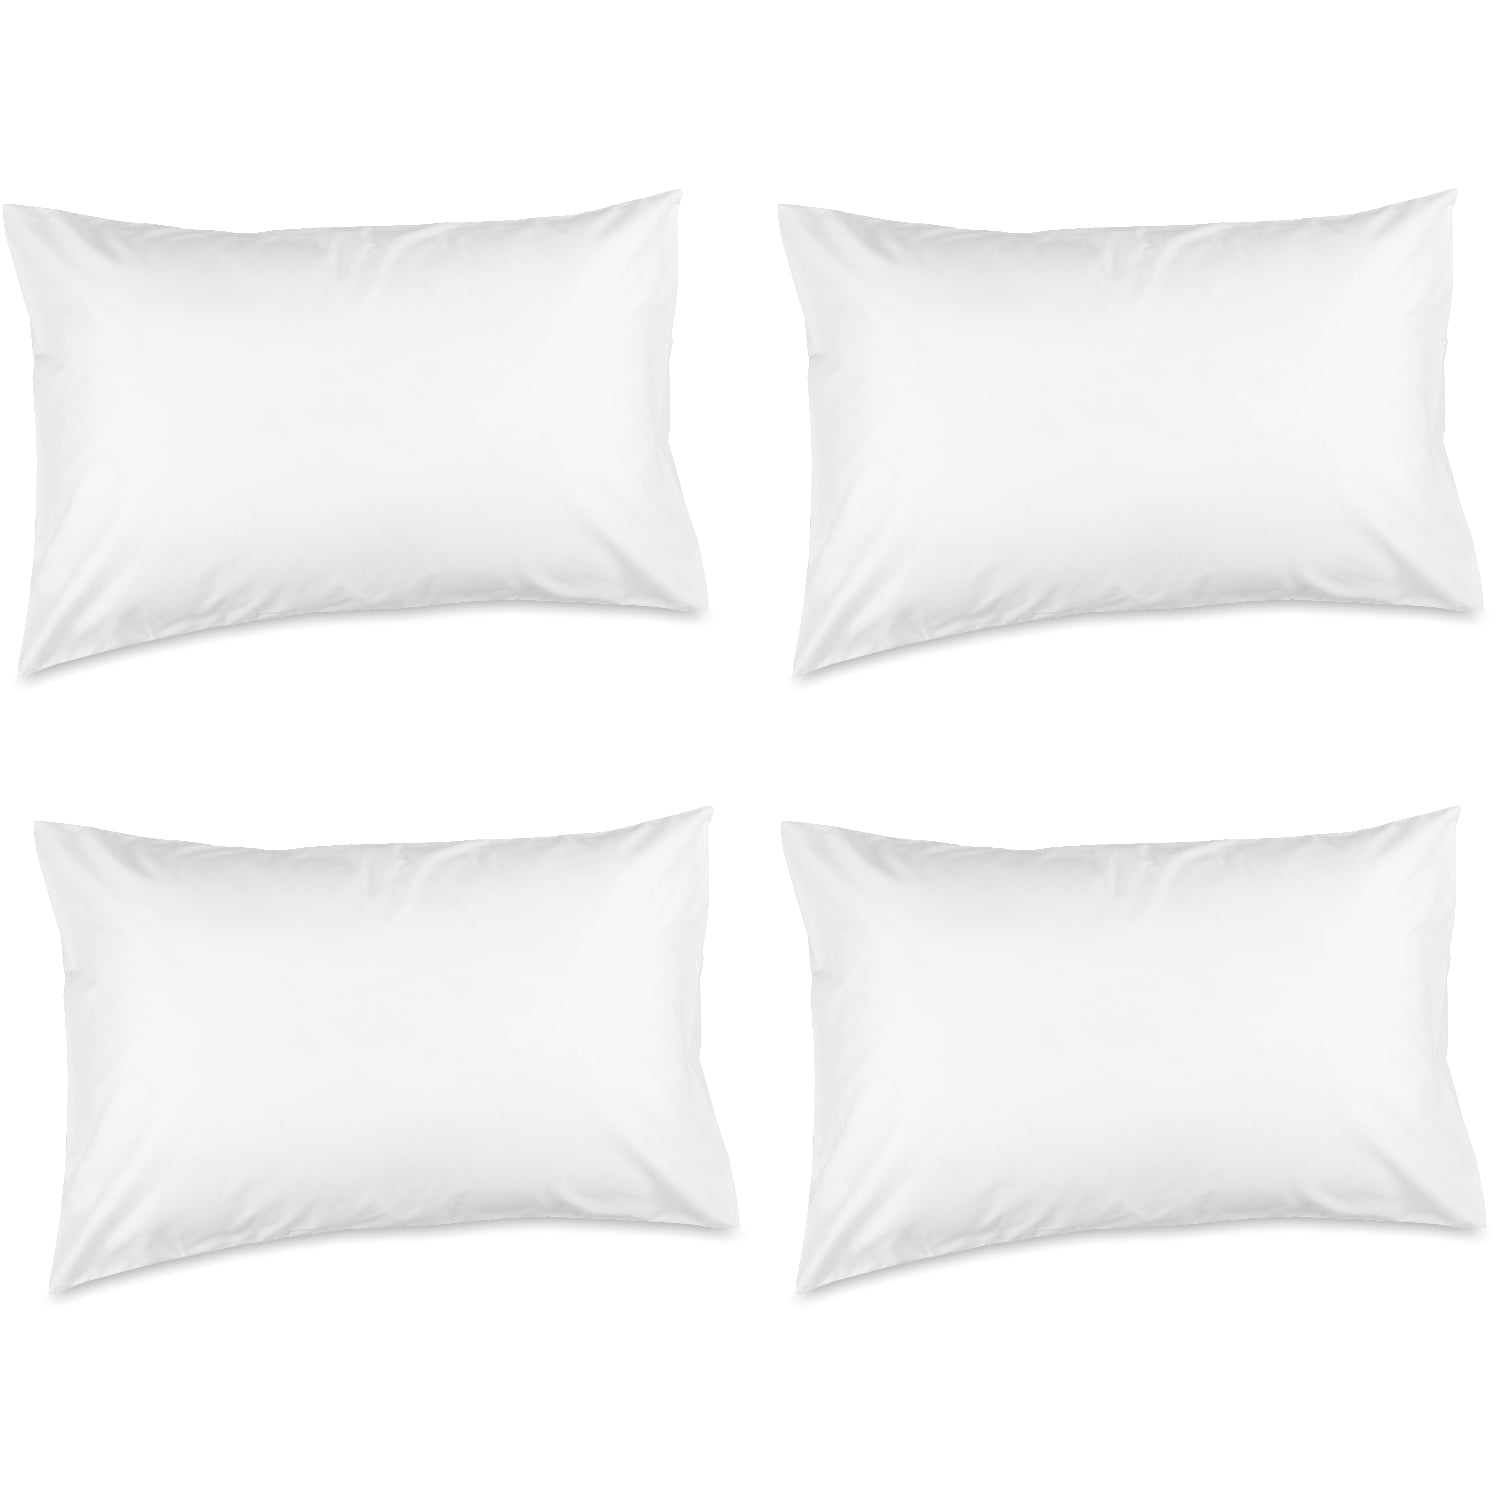 OTOSTAR 18''x18'' Pillow Inserts Set of 4 Decorative 18 Inch Pillow  Inserts-Square Interior Sofa Throw Pillow Inserts with 100% Cotton Cover -  White